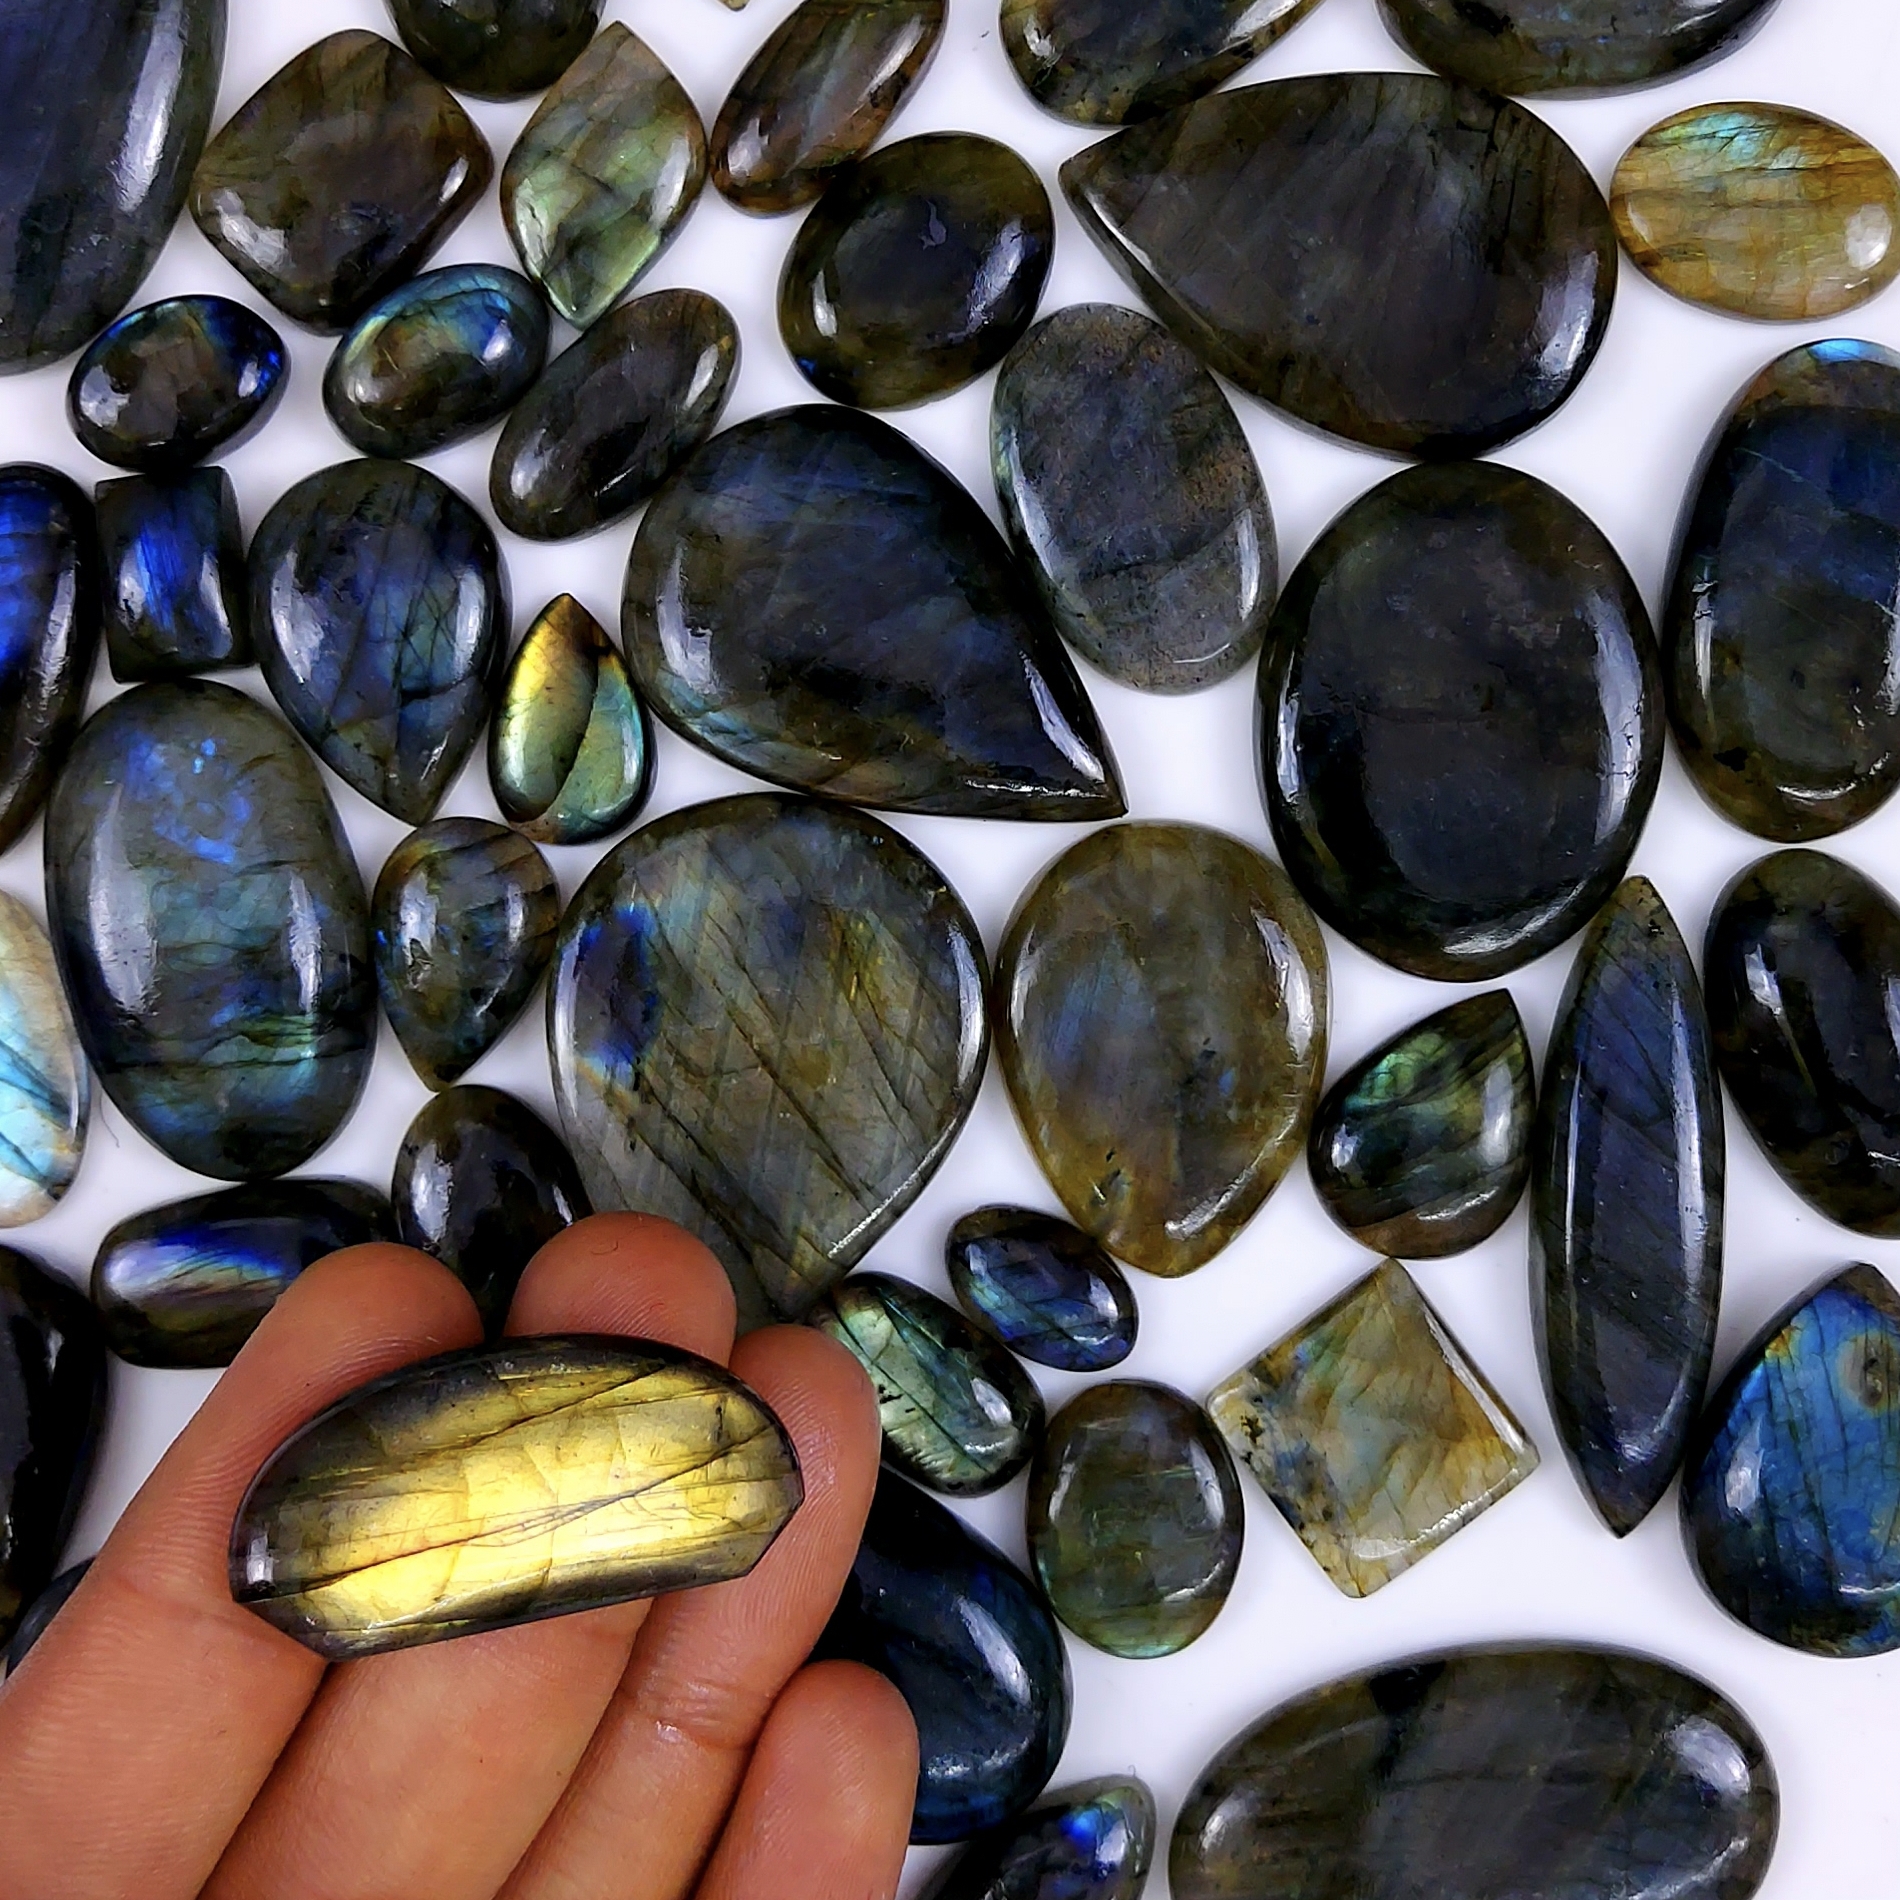 46pc 1569Cts Labradorite Cabochon Multifire Healing Crystal For Jewelry Supplies, Labradorite Necklace Handmade Wire Wrapped Gemstone Pendant 45x35 18x13mm#6315